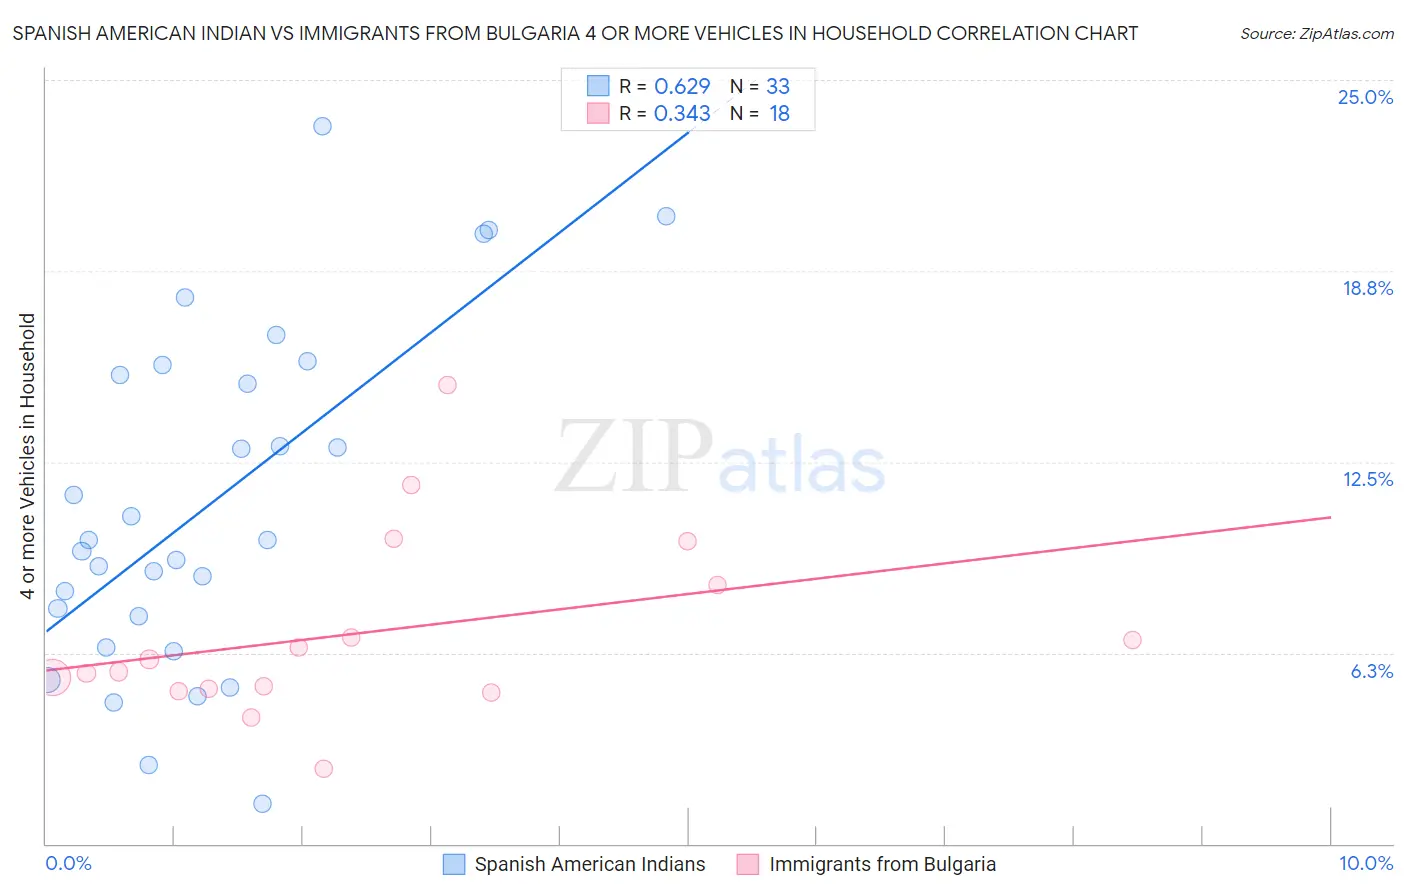 Spanish American Indian vs Immigrants from Bulgaria 4 or more Vehicles in Household